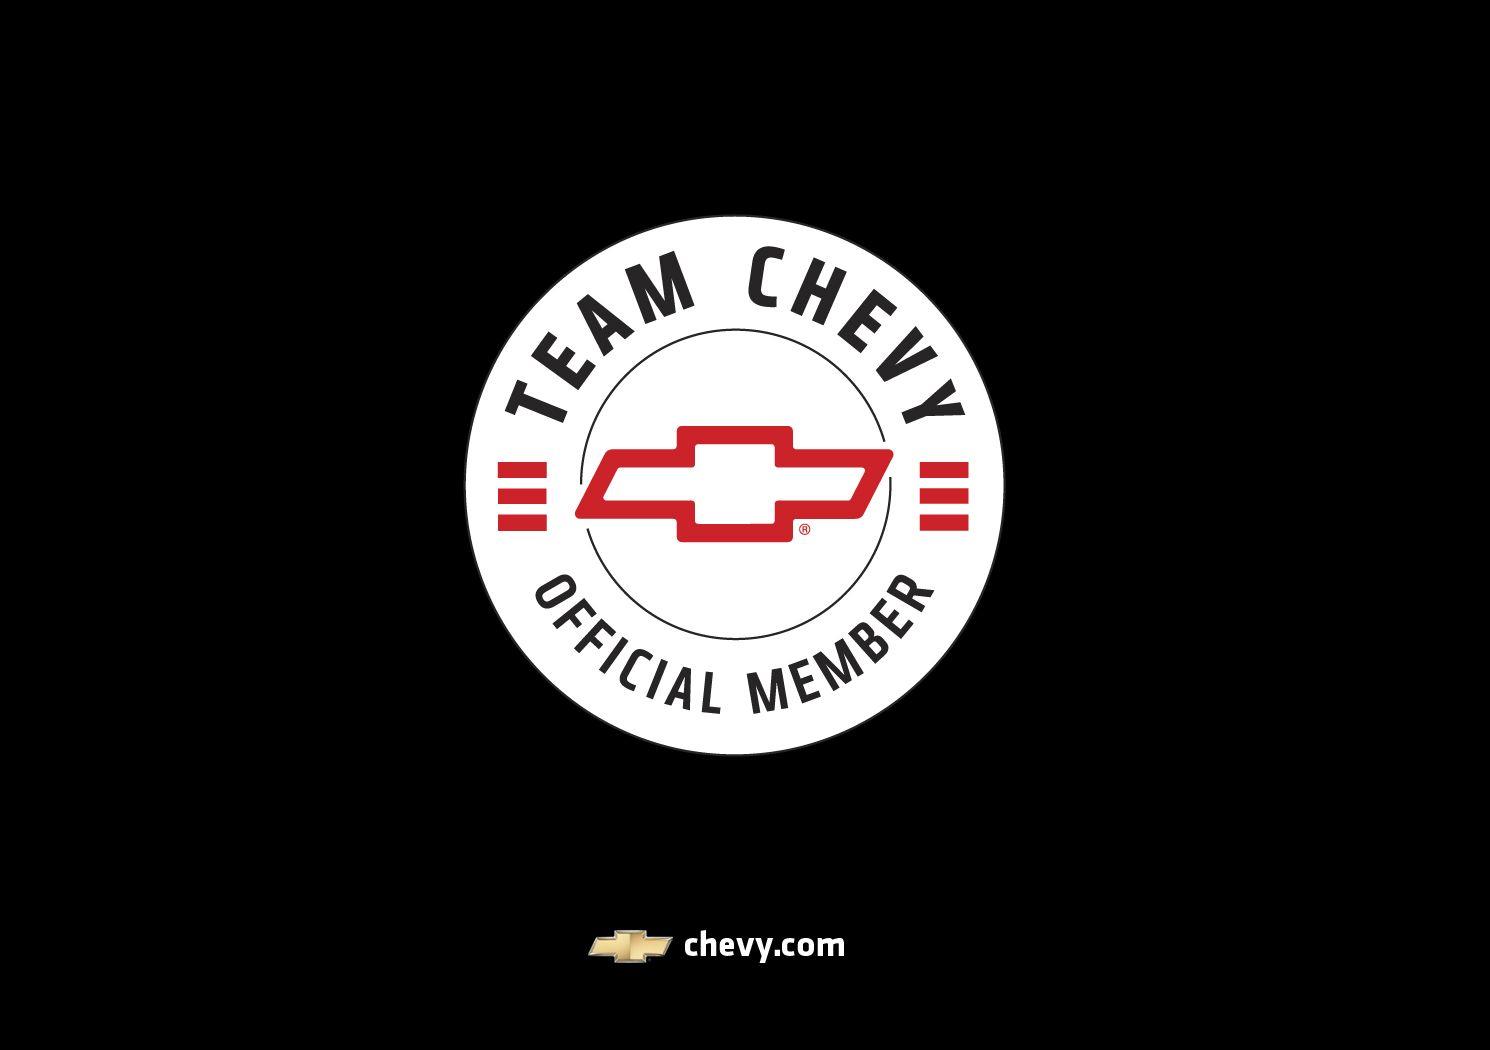 Download the Team Chevy Wallpaper, Team Chevy iPhone Wallpaper, Team.